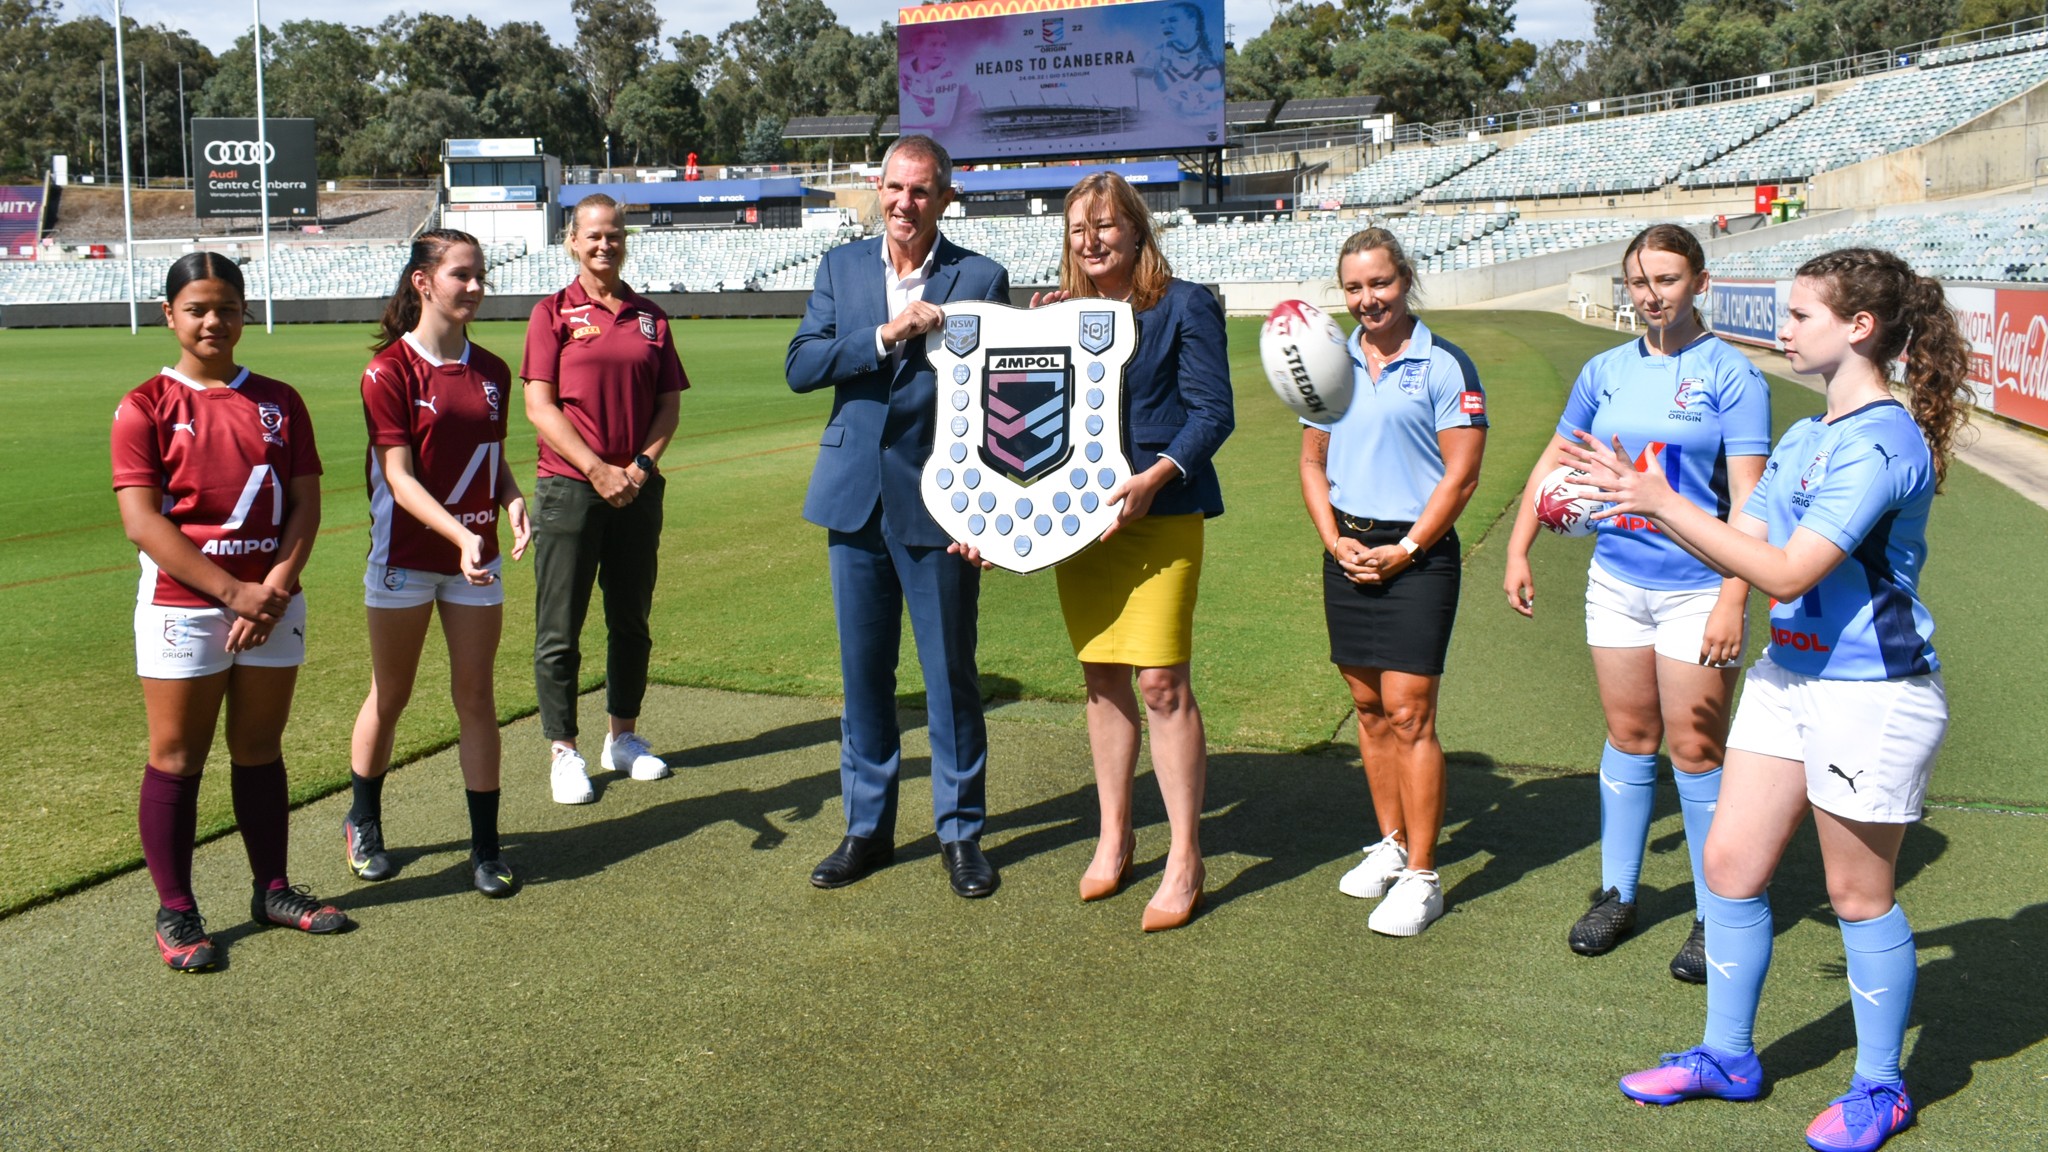 Canberra Stadium to host Women’s Rugby League State of Origin match